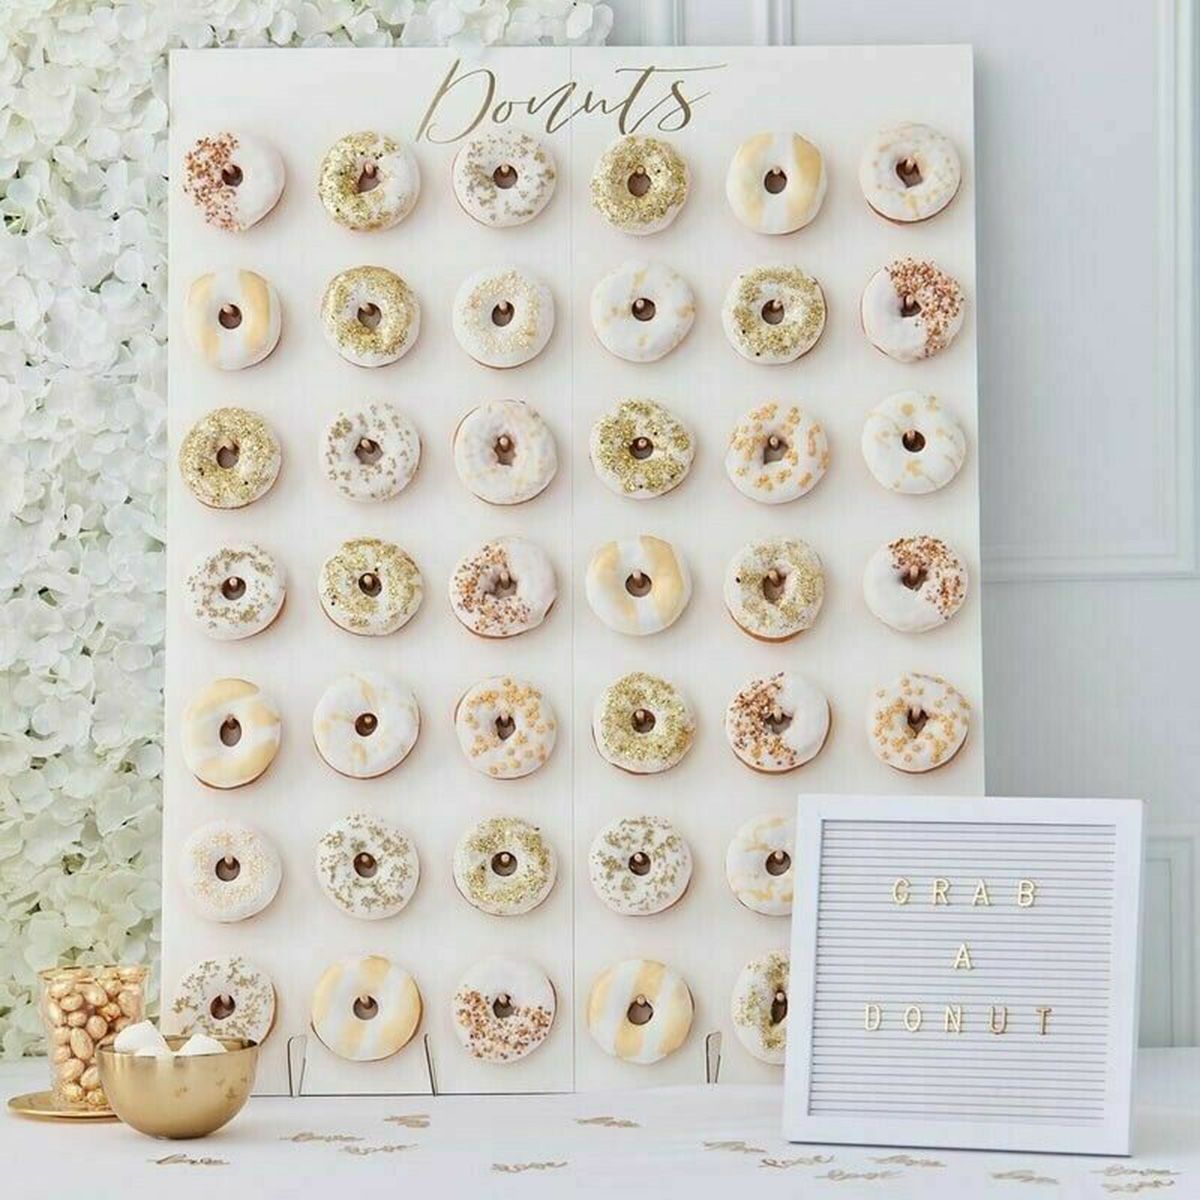 800x600mm-Donut-Wall-Stand-Baking-Cooling-Rack-Holds-Candy-Sweet-Cart-Rustic-Wedding-Decoration-Wood-1545649